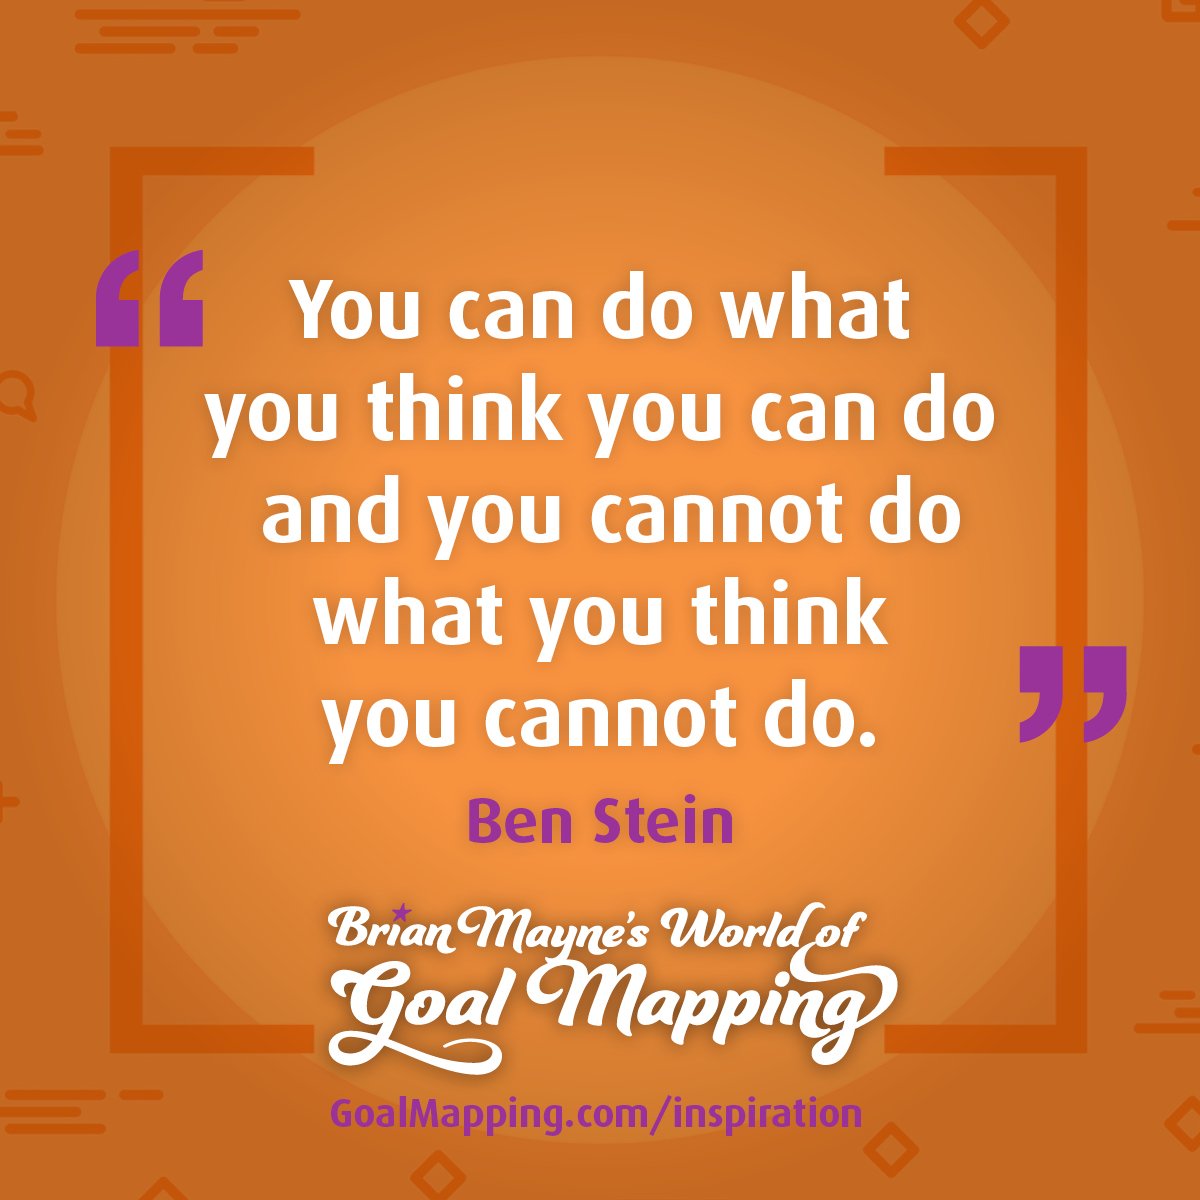 "You can do what you think you can do and you cannot do what you think you cannot do." Ben Stein